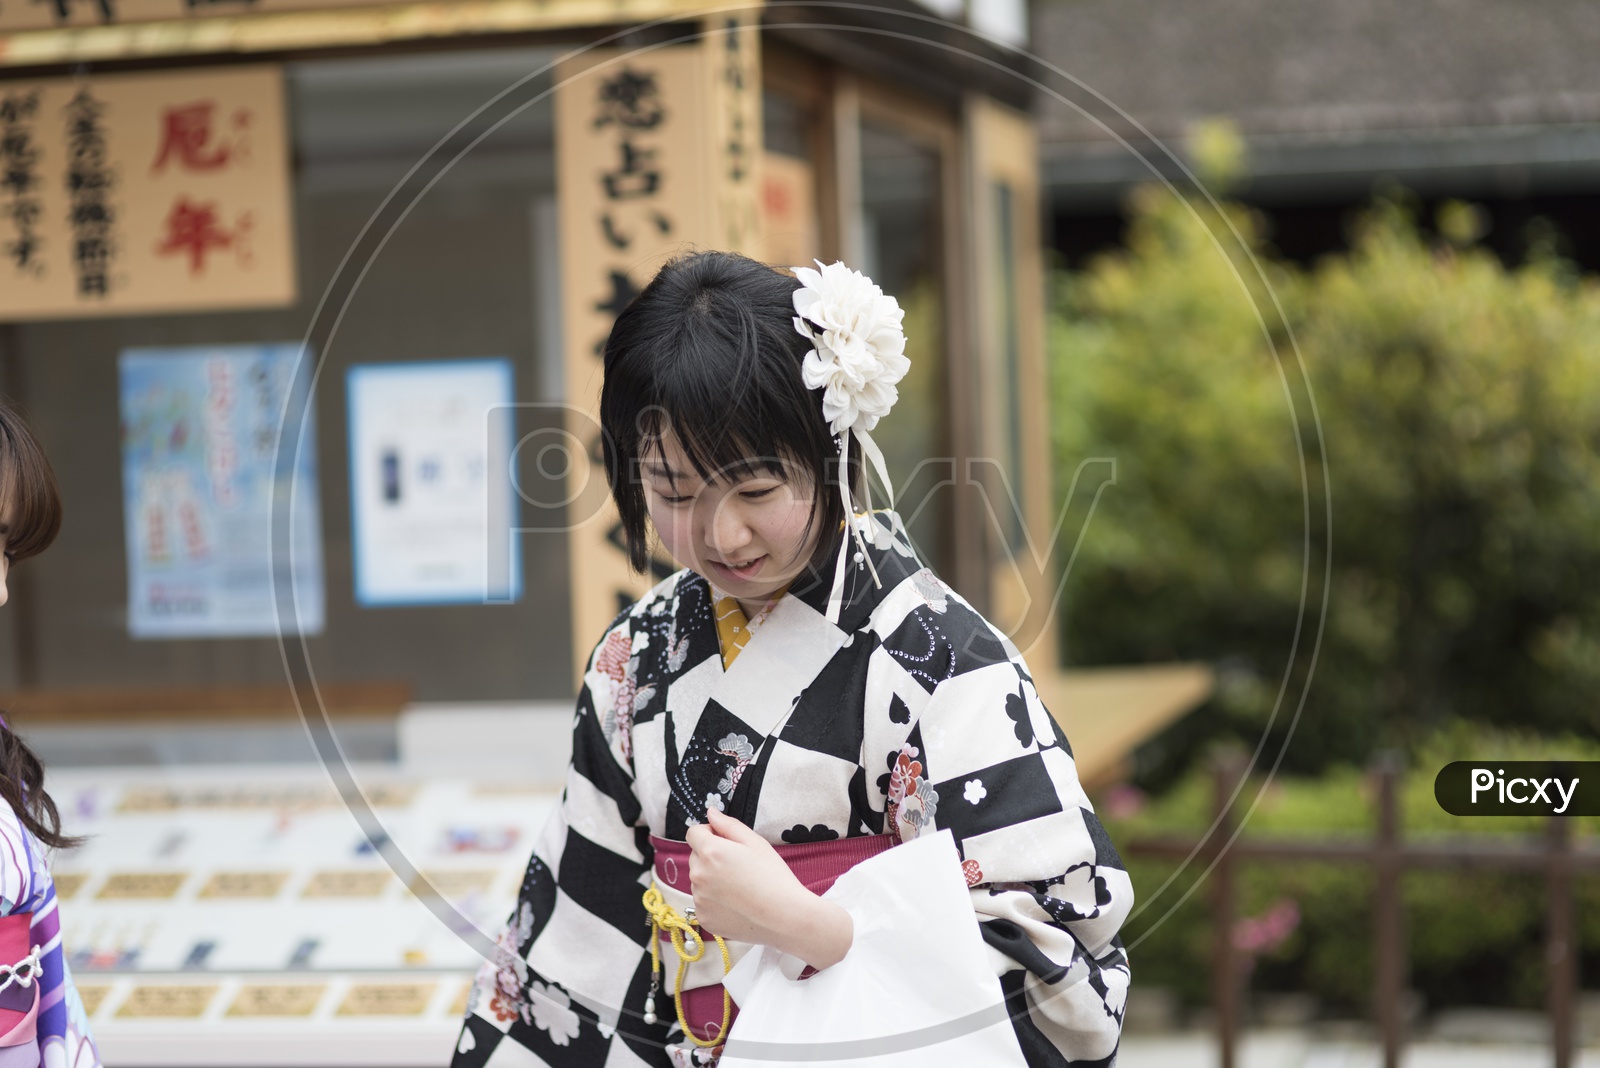 A Japanese Woman wearing black and white costume